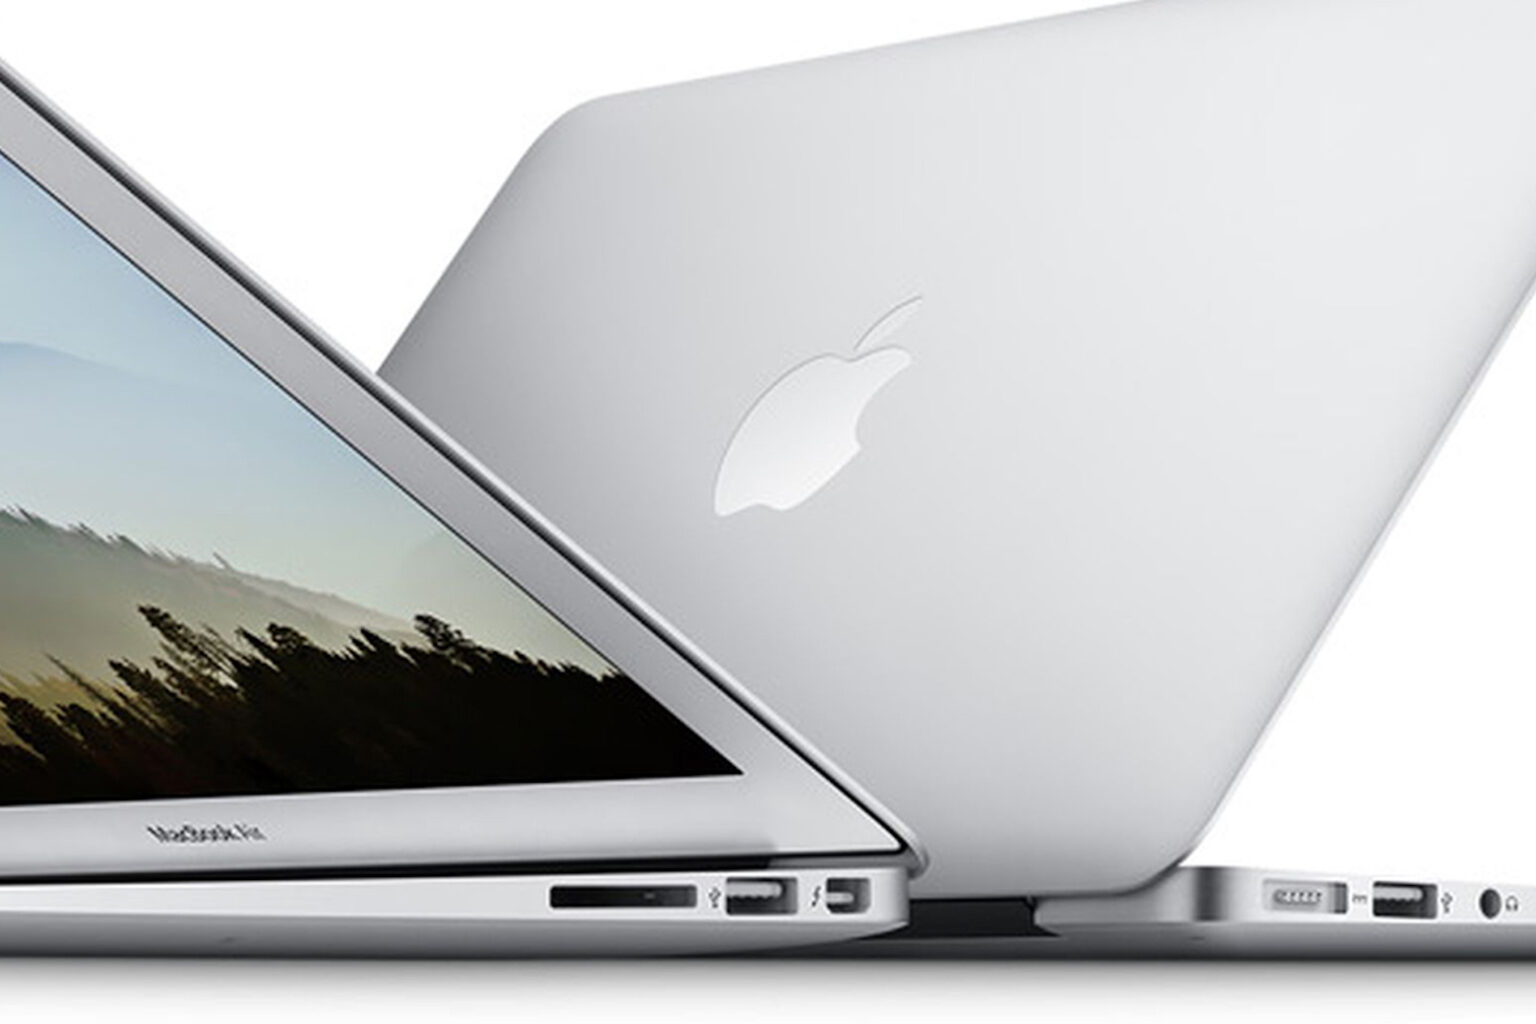 Woot's latest sale offers a selection of reconditioned MacBook Air and MacBook Pro models.